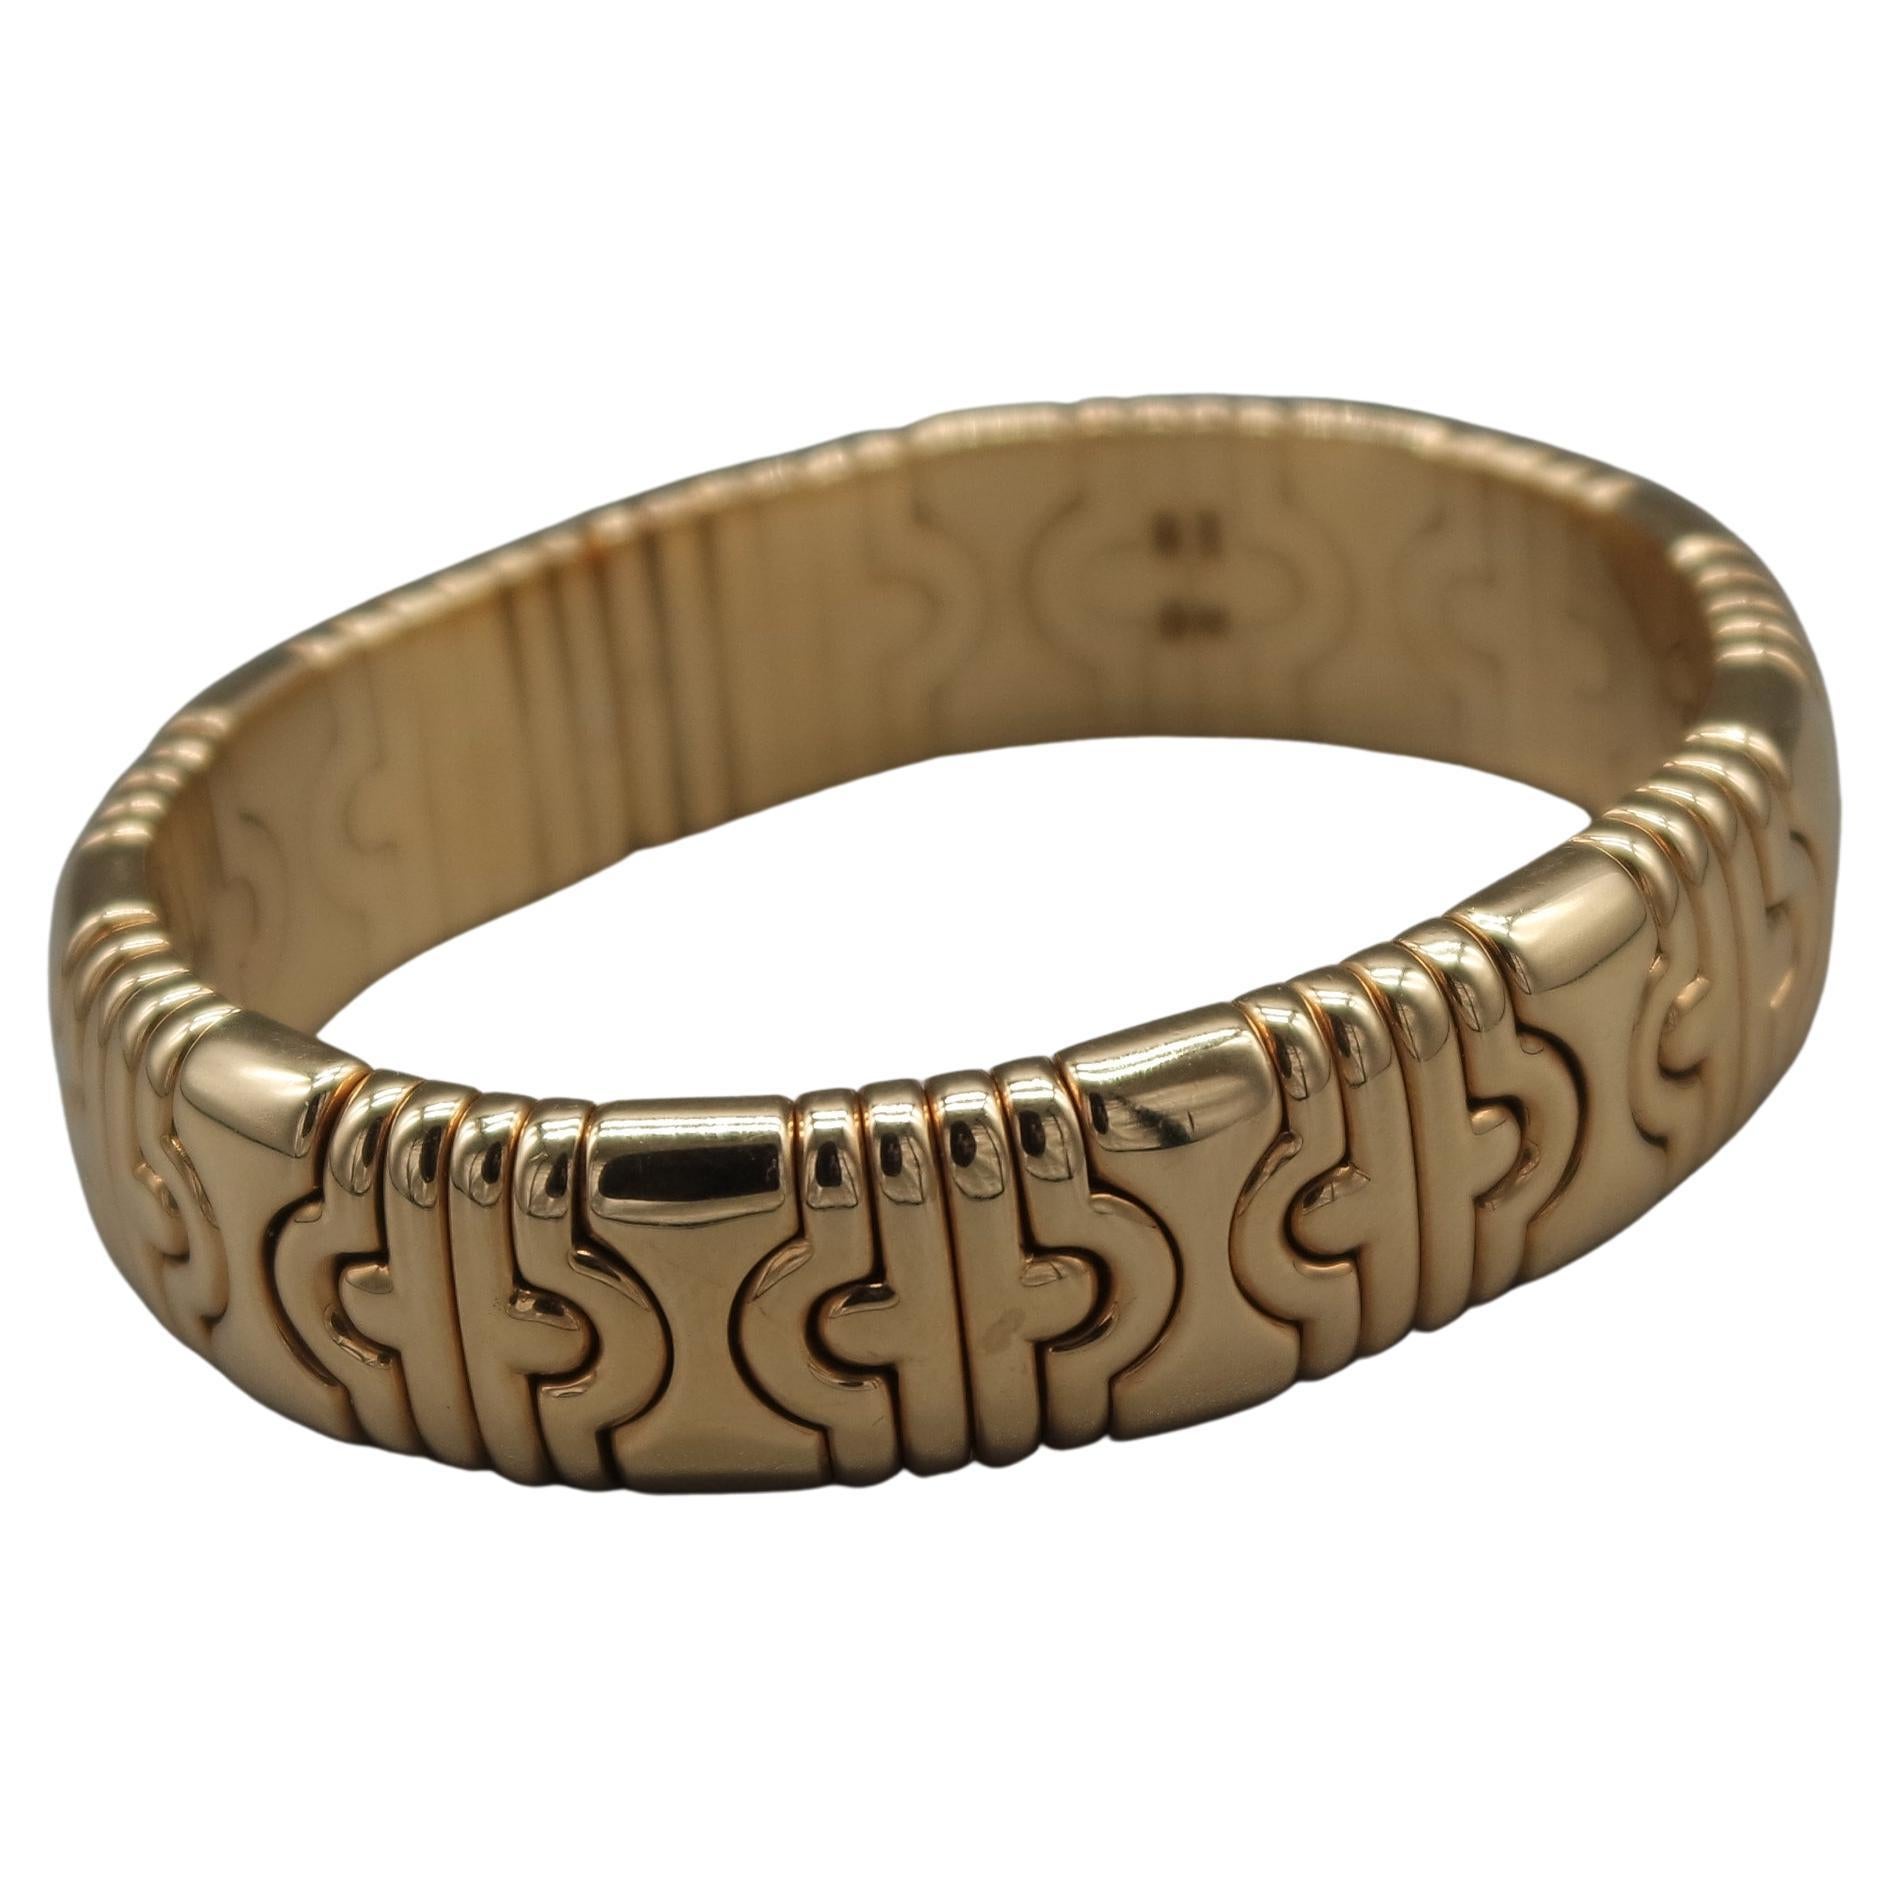 This exquisite authentic Bulgari bangle bracelet of immaculate design and artistic craftsmanship is of Italian provenance, crafted in solid 18K yellow gold, weighing app. 88.45 grams. Depicting delicate geometrical motives throughout the bracelet,